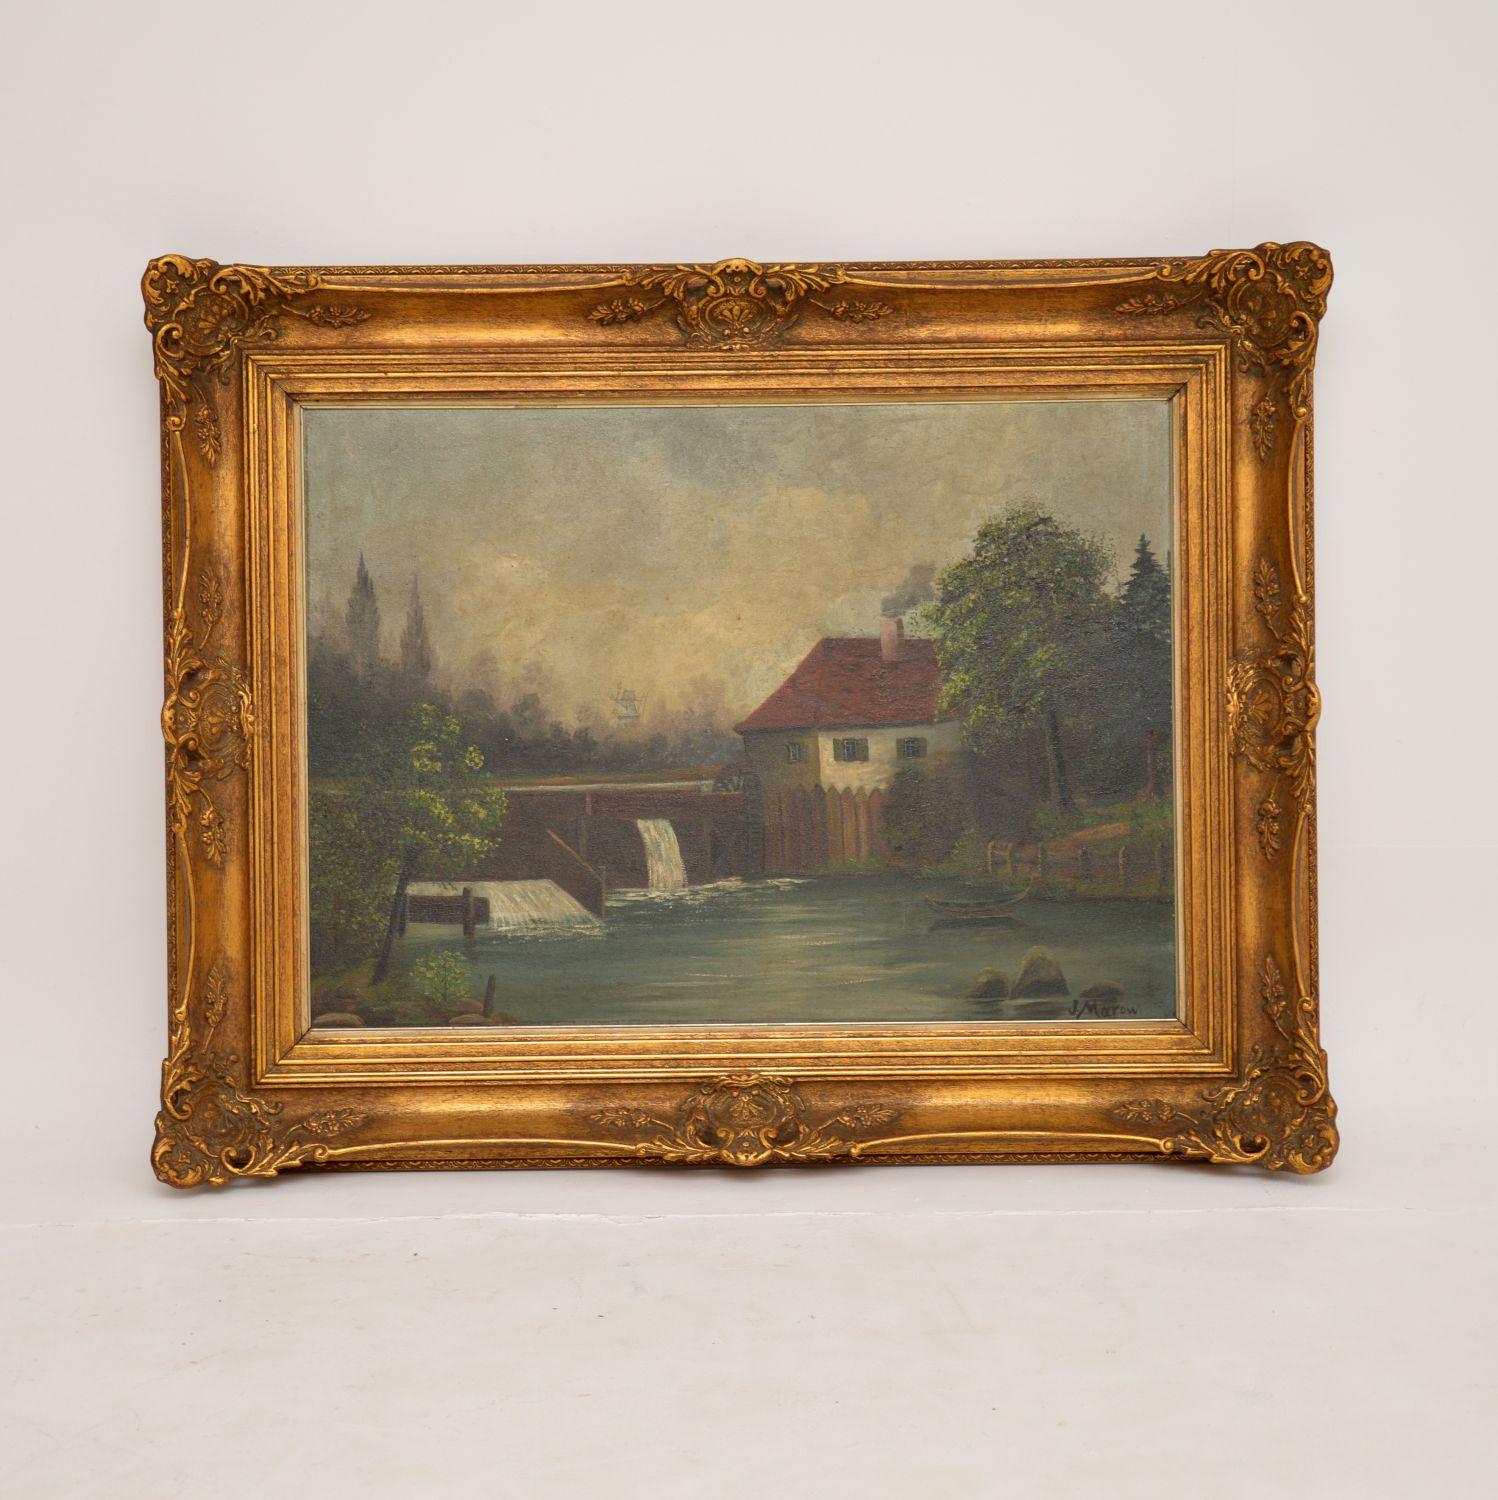 A beautiful, large and impressive antique landscape oil painting, this dates from around the 19th century.

It depicts a lovely countryside scene of a water mill. It is very well executed, with lovely details and gorgeous, subtle colour tones.

It